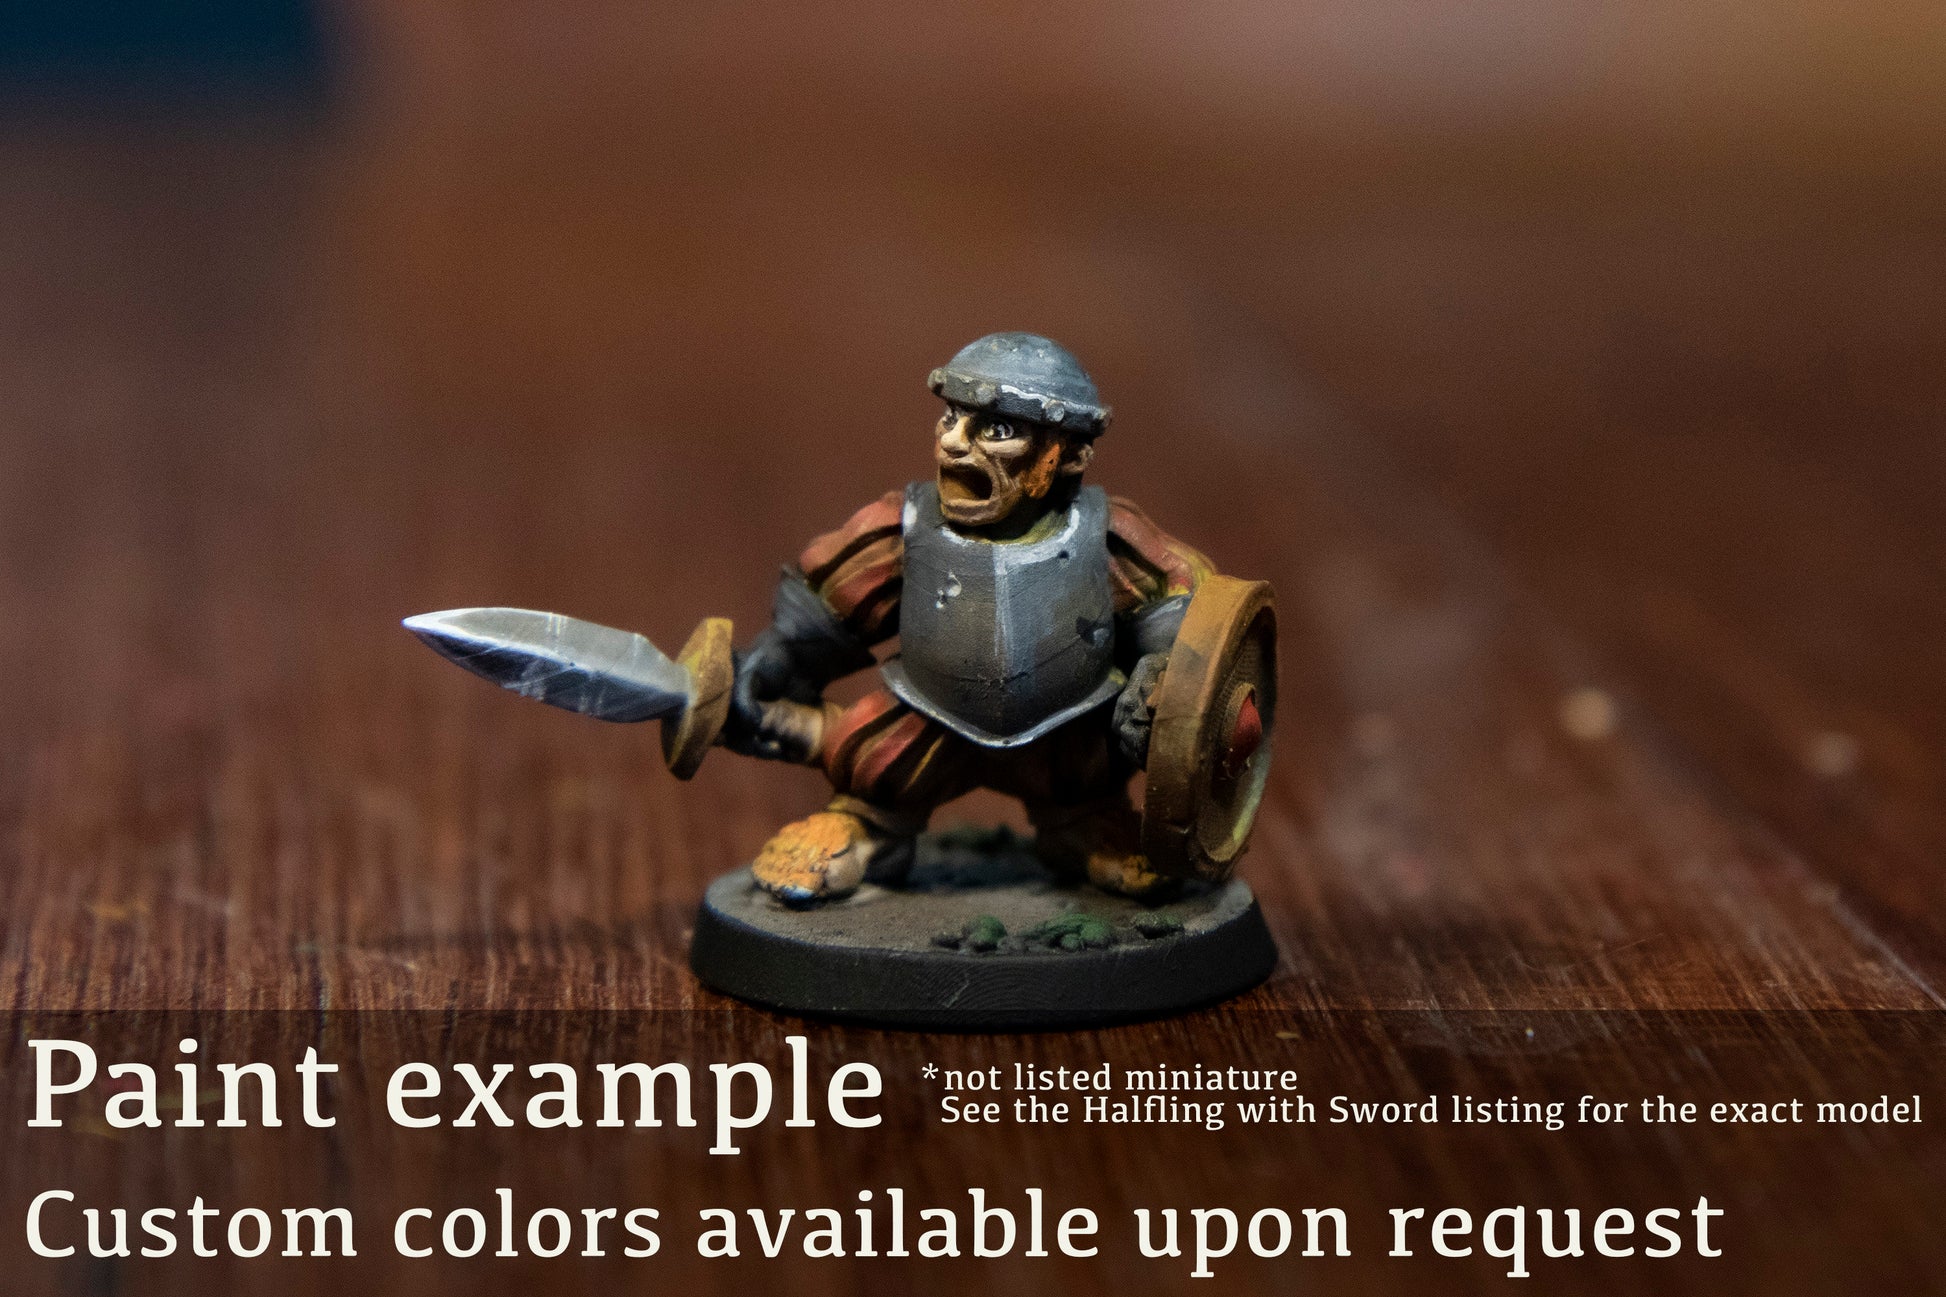 Alcuin the Witch Hunter - Archvillain Games Printed Miniature | Dungeons & Dragons | Pathfinder | Tabletop